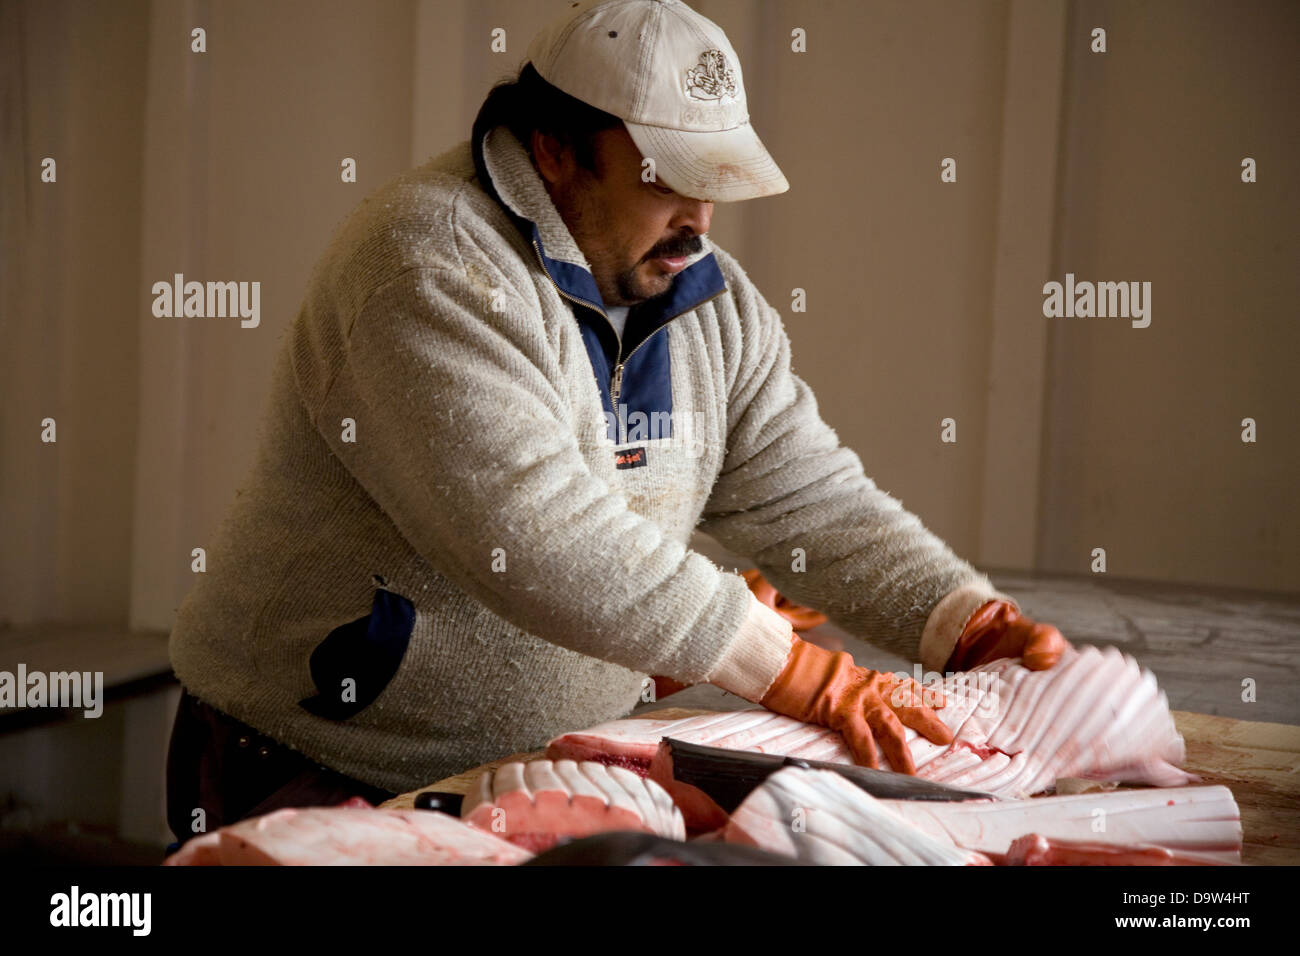 A traditional staple of the Inuit diet, whale meat (Minke is this instance) is sold at this stand in Qeqertarsuaq, Greenland. Stock Photo